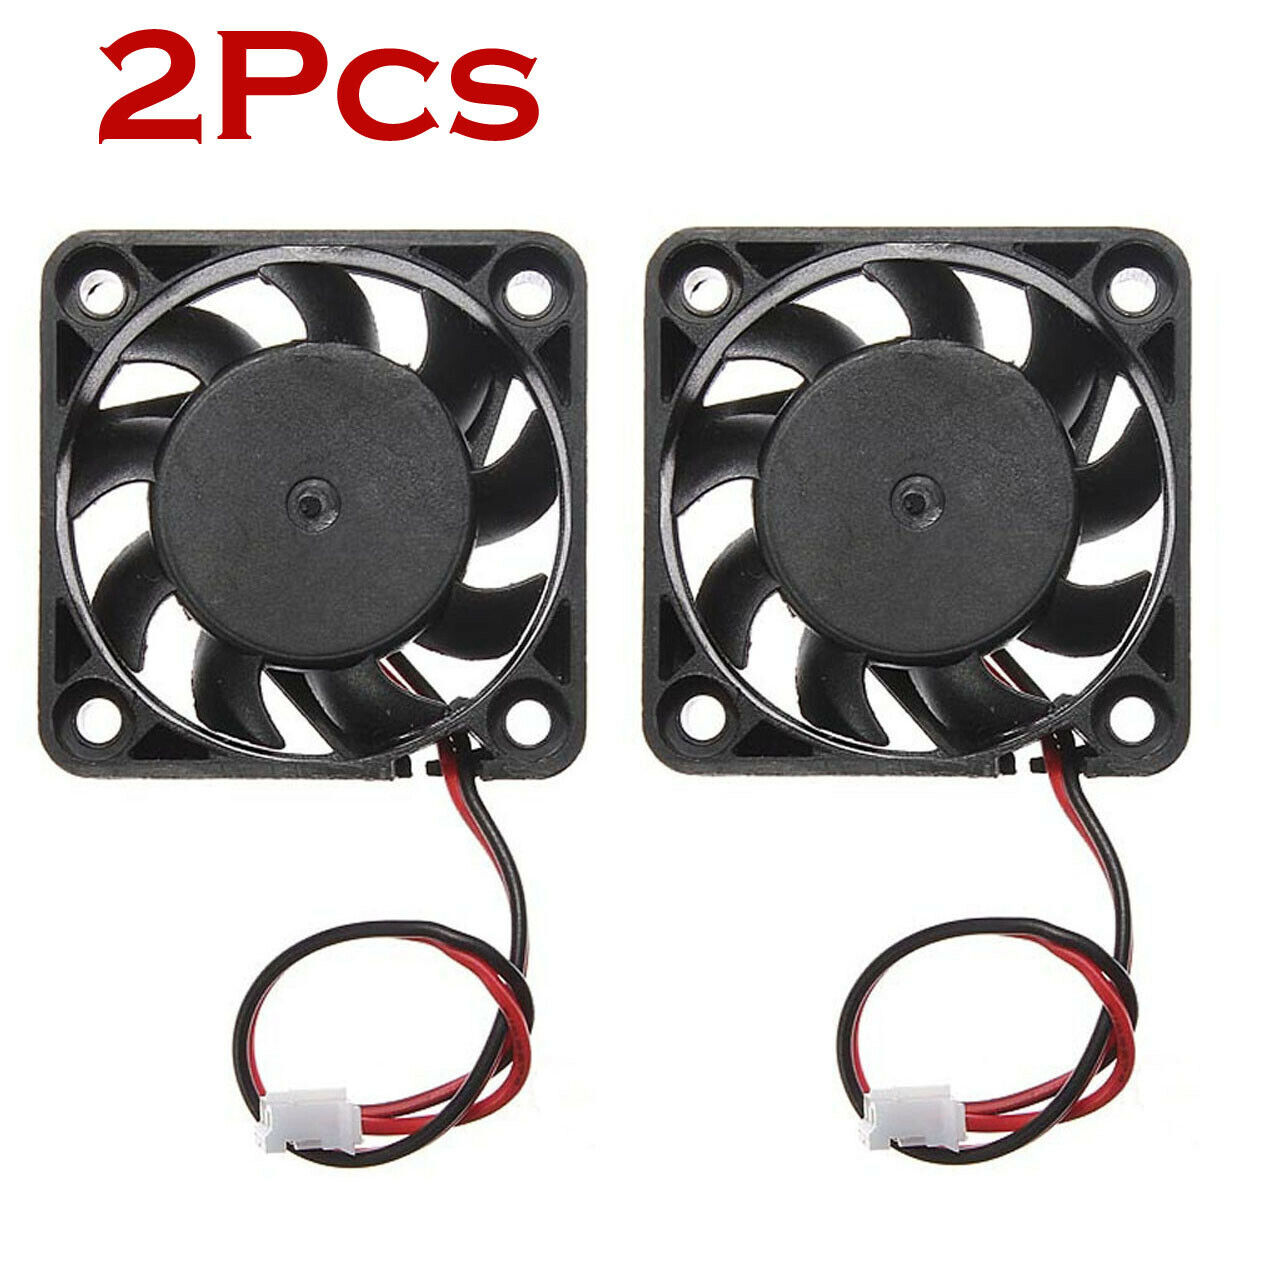 2PC 12V Mini Silent Cooling Computer Fan - Small 40mm x 10mm DC Brushless 2-pin